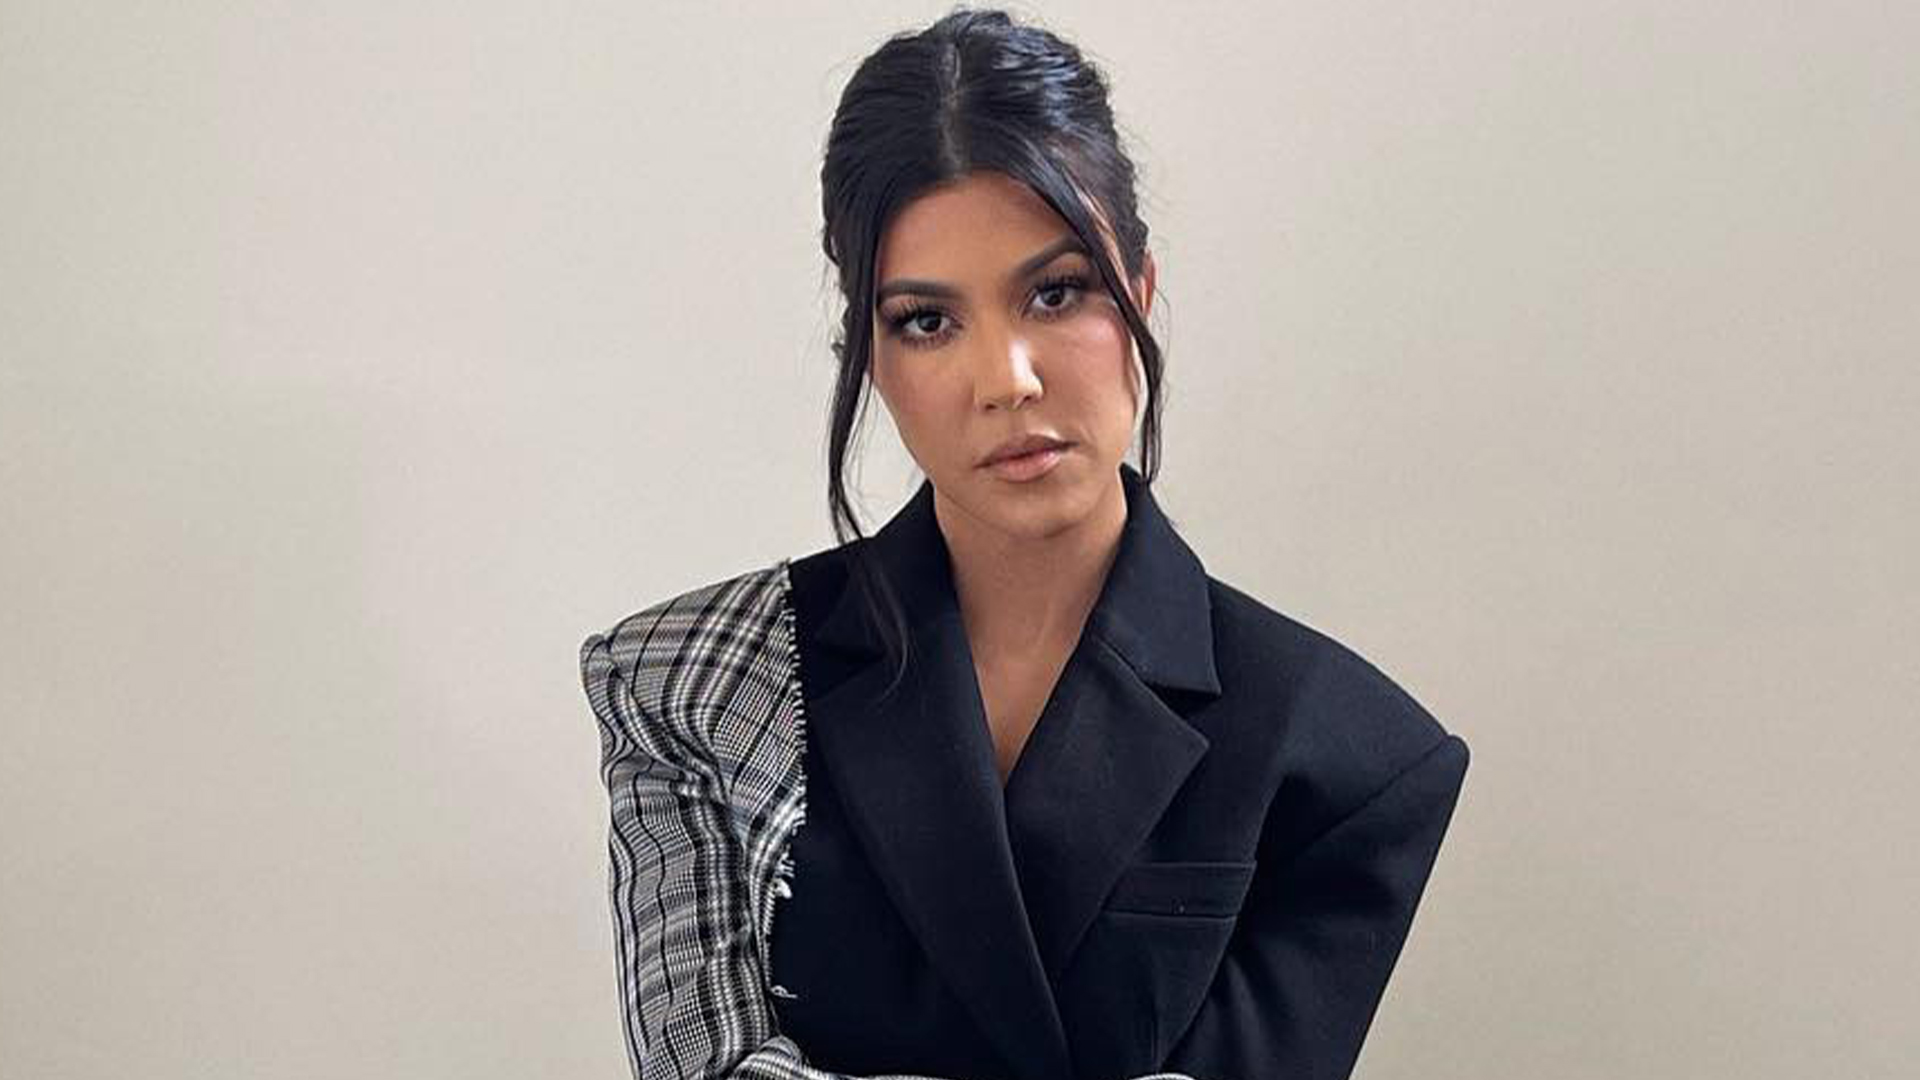 Kourtney Kardashian covers her stomach in an oversized blazer as she appears to be pregnant with her fourth child, according to a new photo.